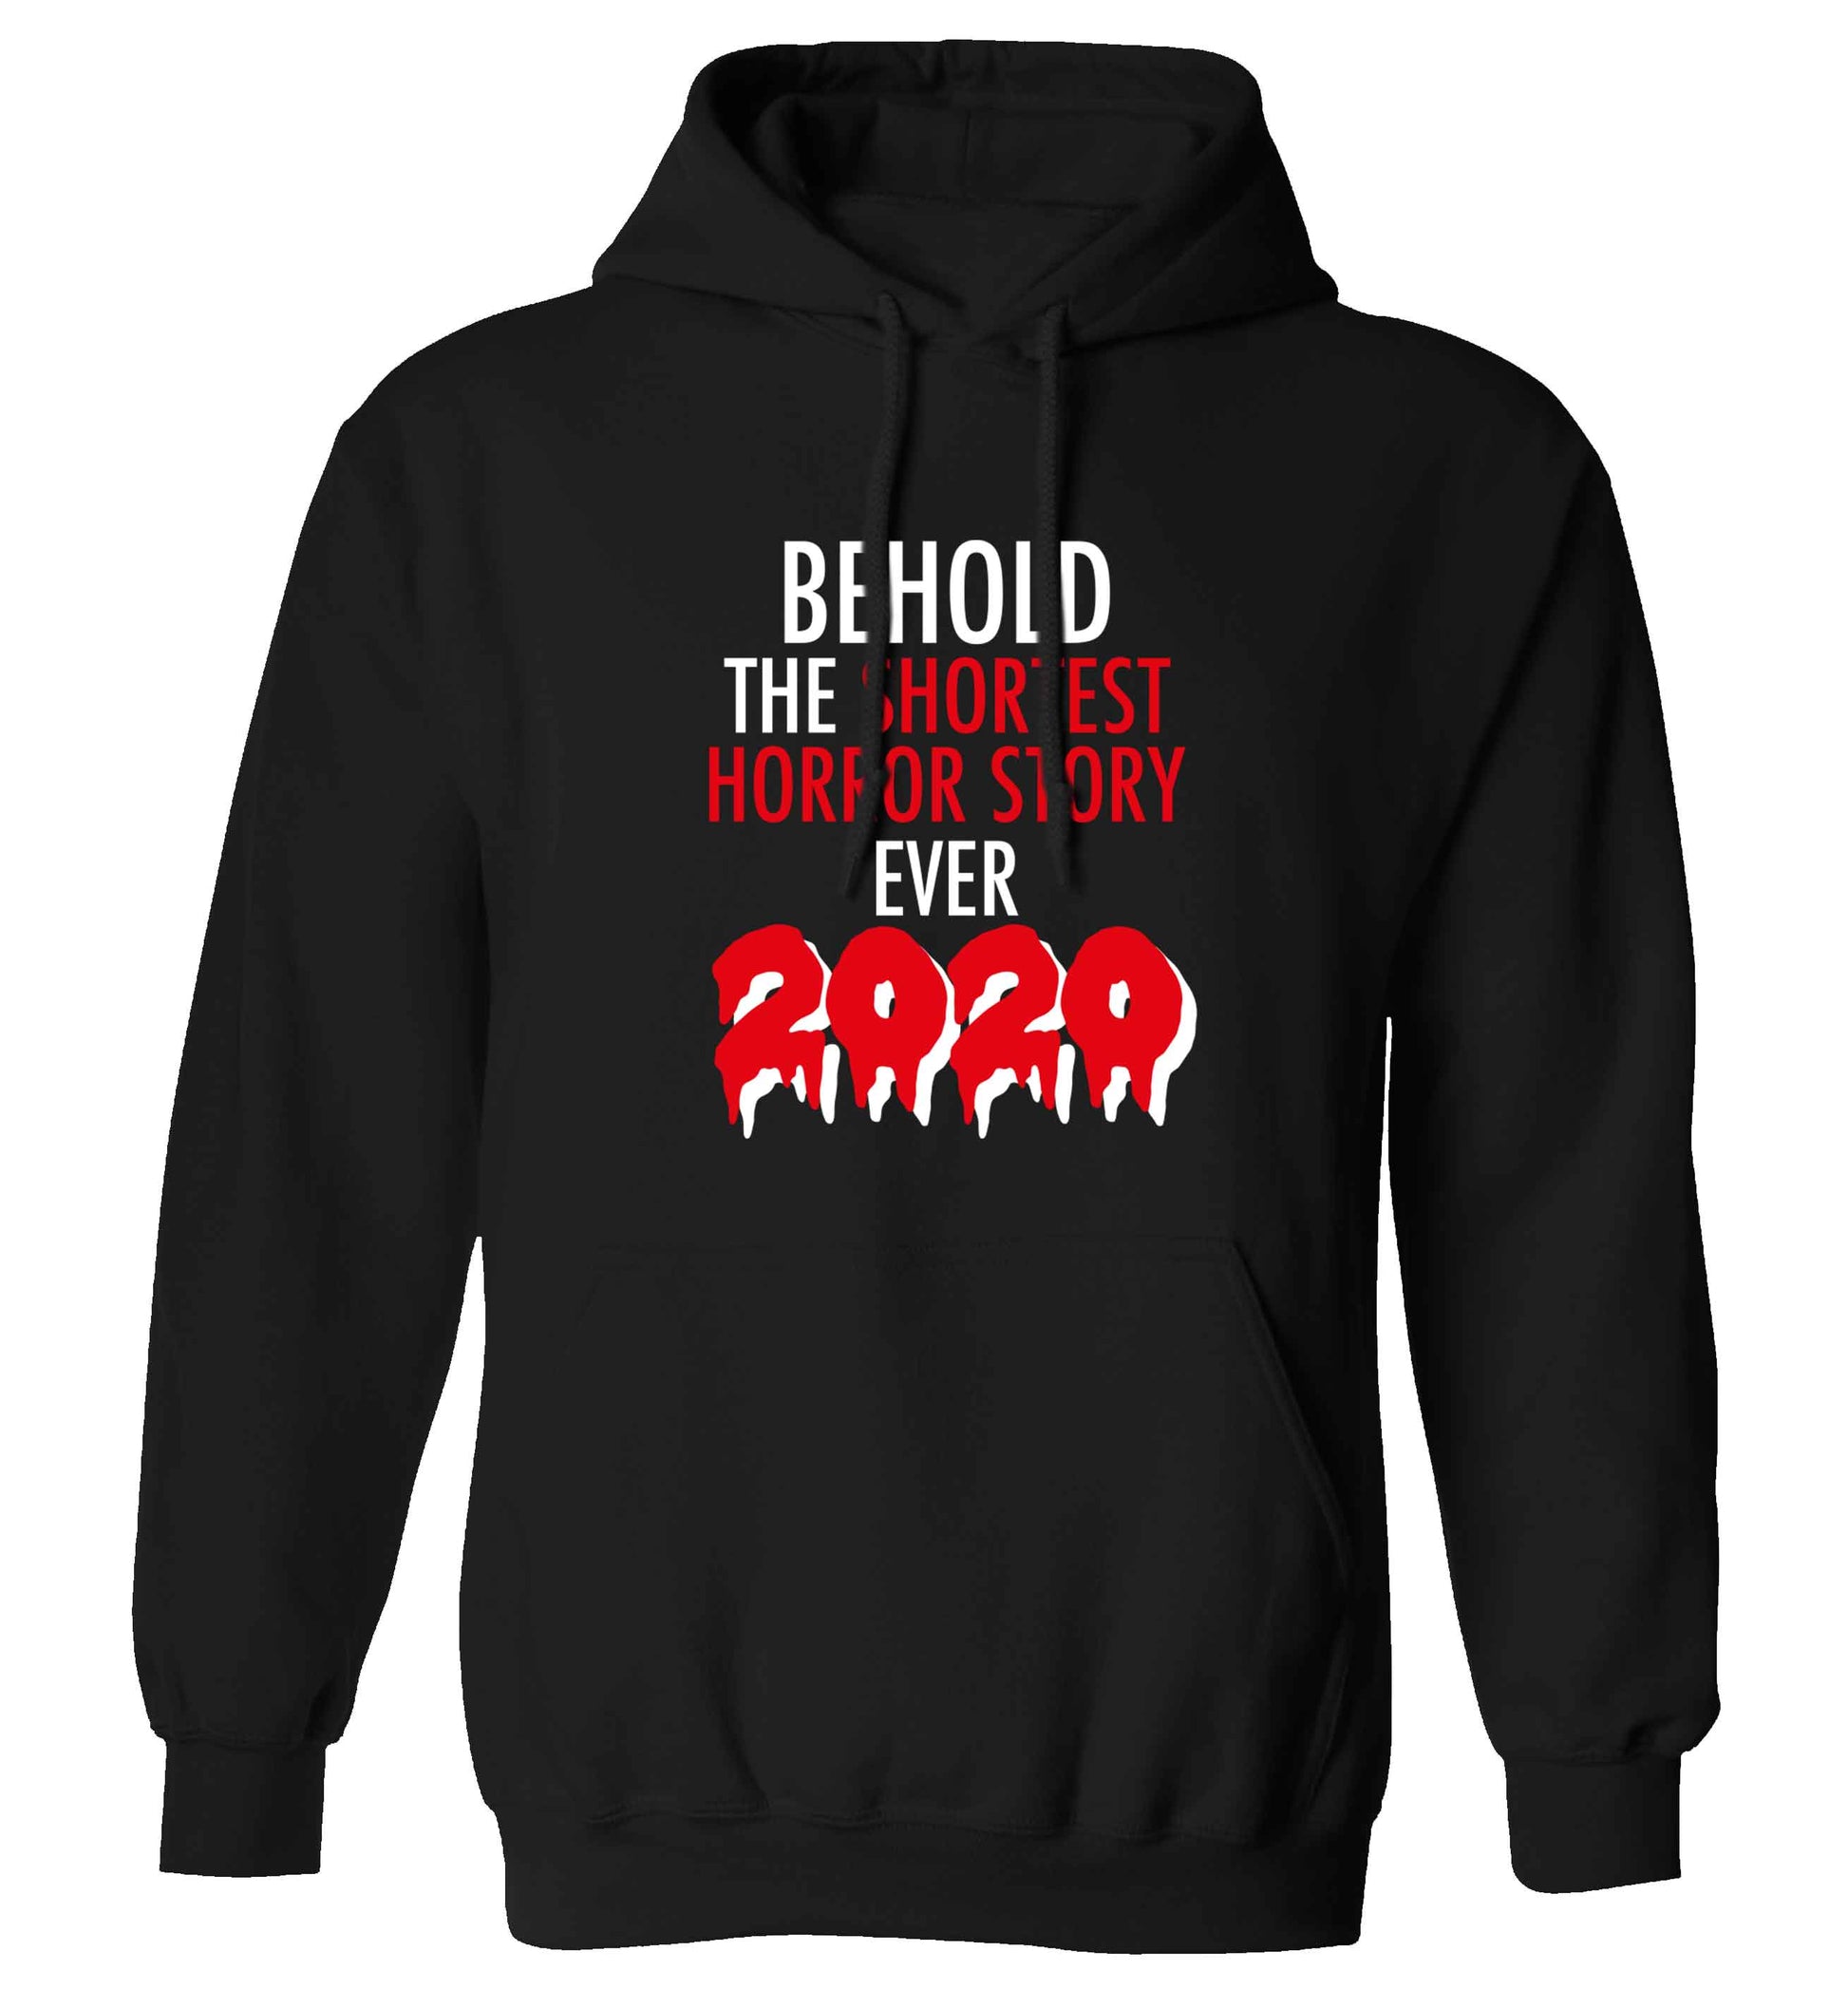 Shortest horror story ever 2020 adults unisex black hoodie 2XL